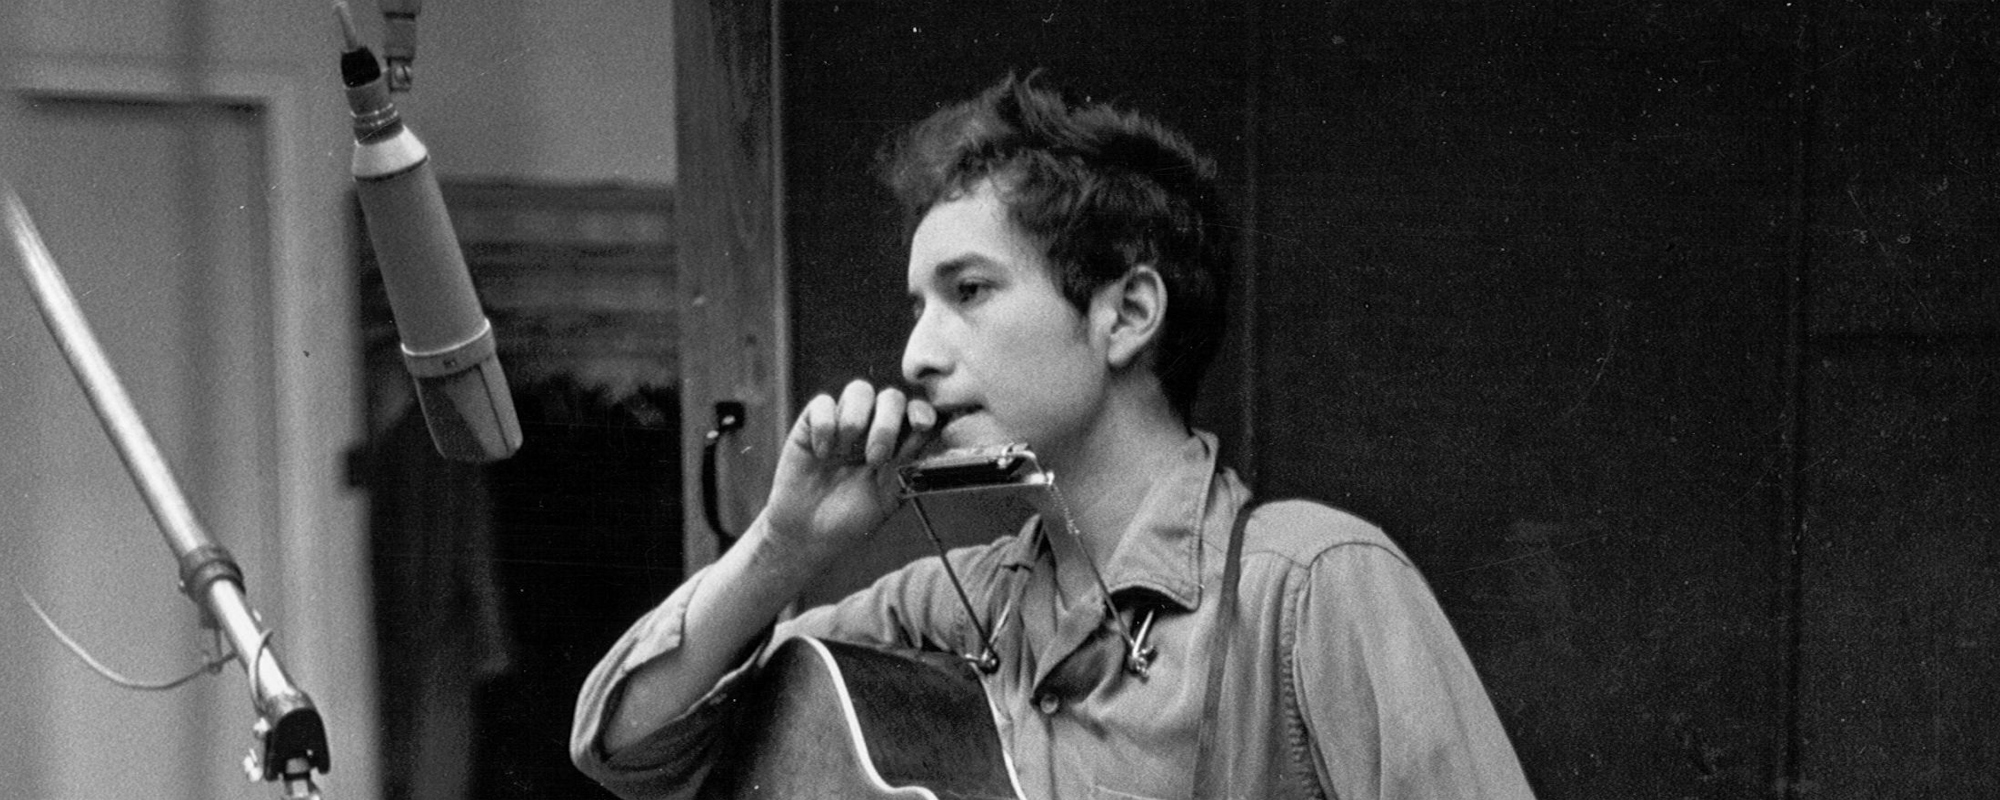 The Story Behind “All I Really Want to Do” by Bob Dylan and Why He No Longer Wanted to Write Songs in Other’s Voices